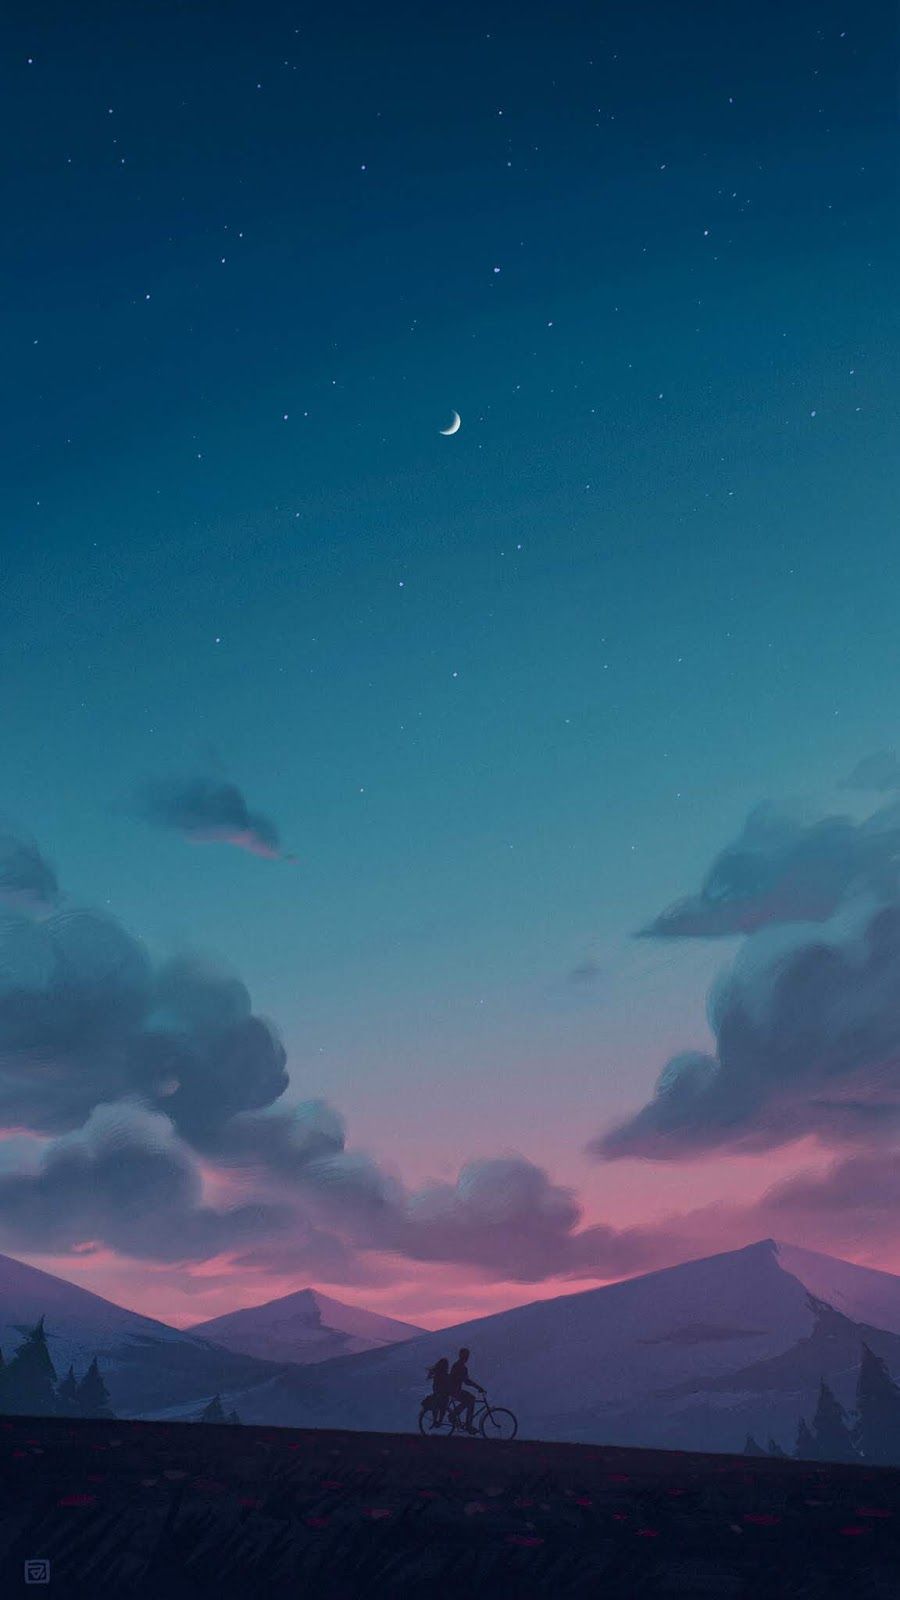 Calm night #wallpaper #iphone #android #background #followme. Scenery wallpaper, Anime scenery wallpaper, Anime scenery